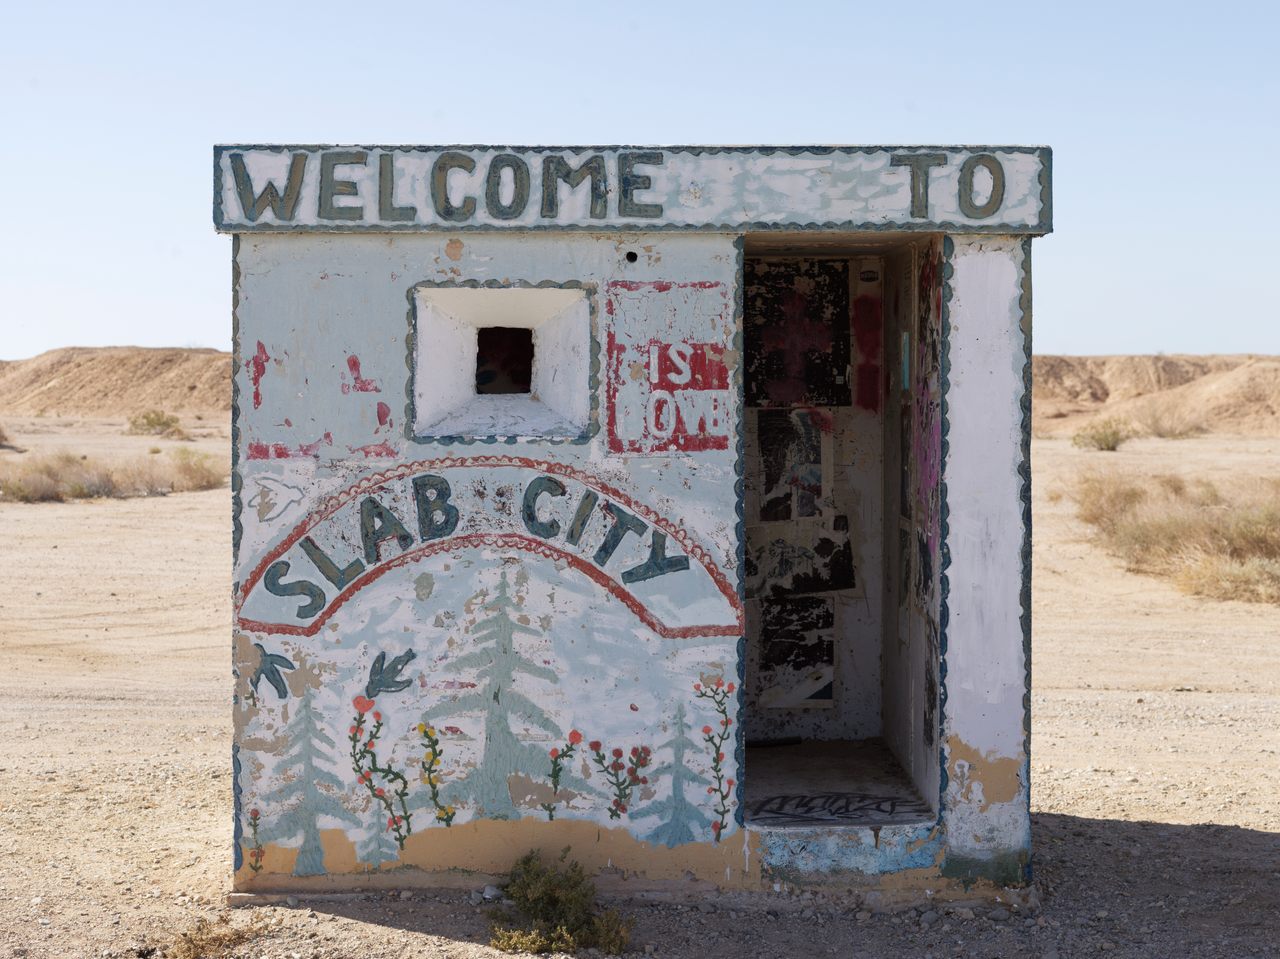 On the perimeter of Slab City. 